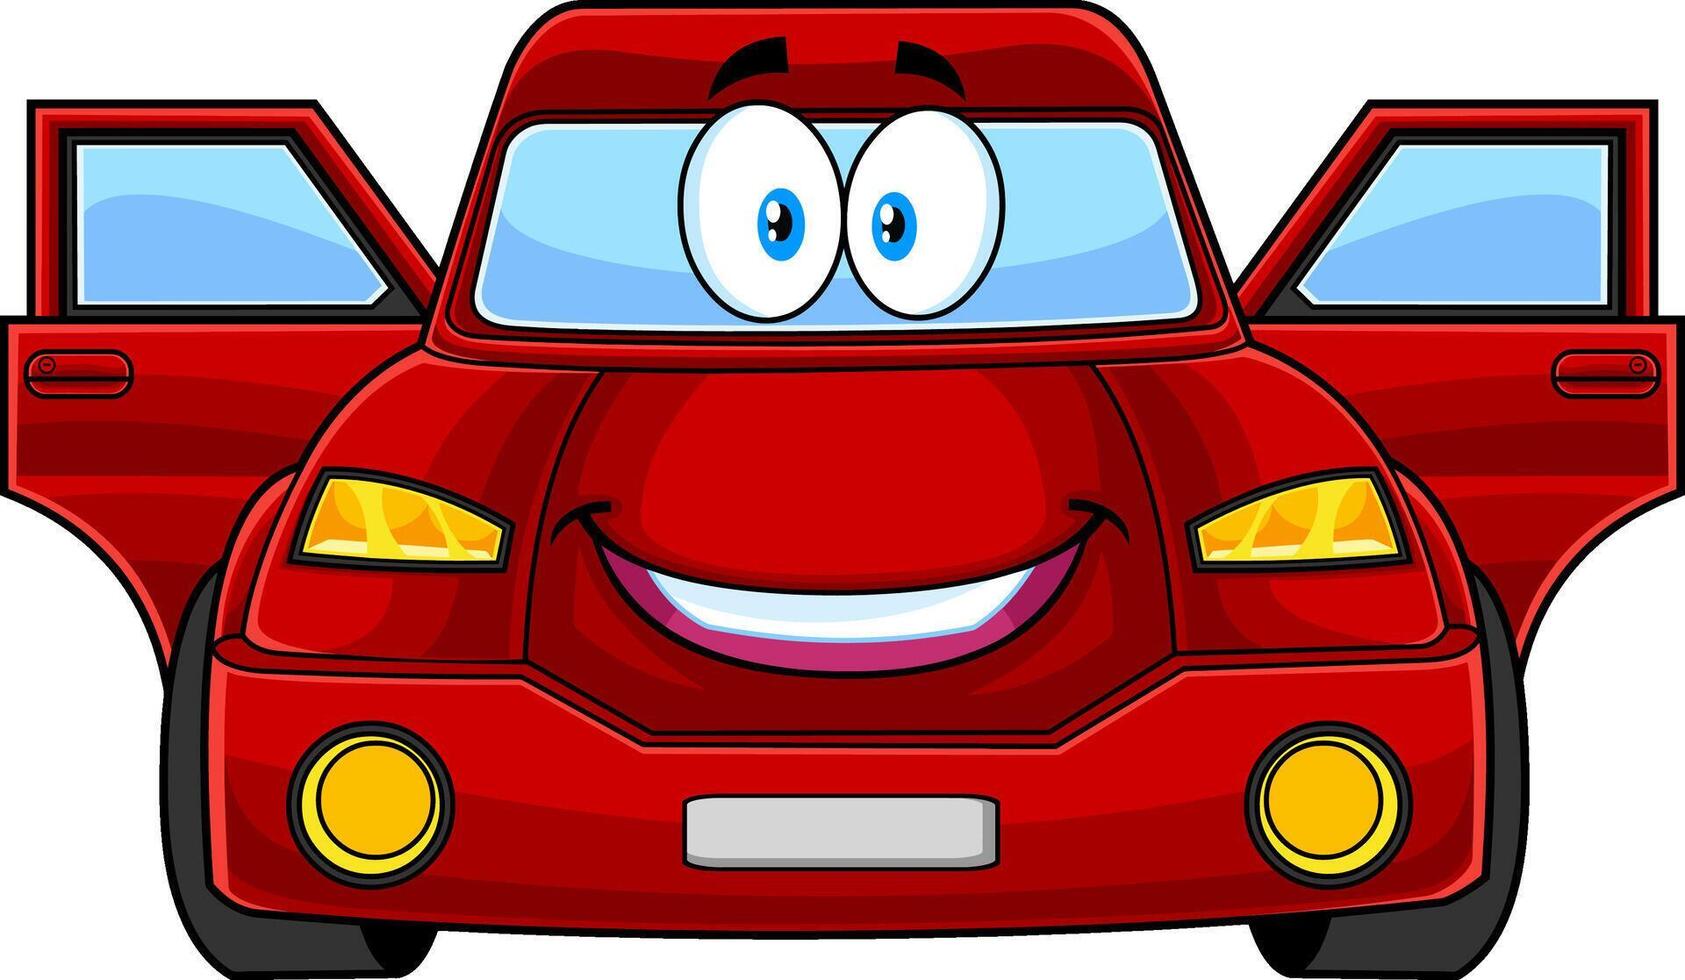 Happy Cute Red Car Cartoon Character With Open Doors. Vector Hand Drawn Illustration Isolated On Transparent Background